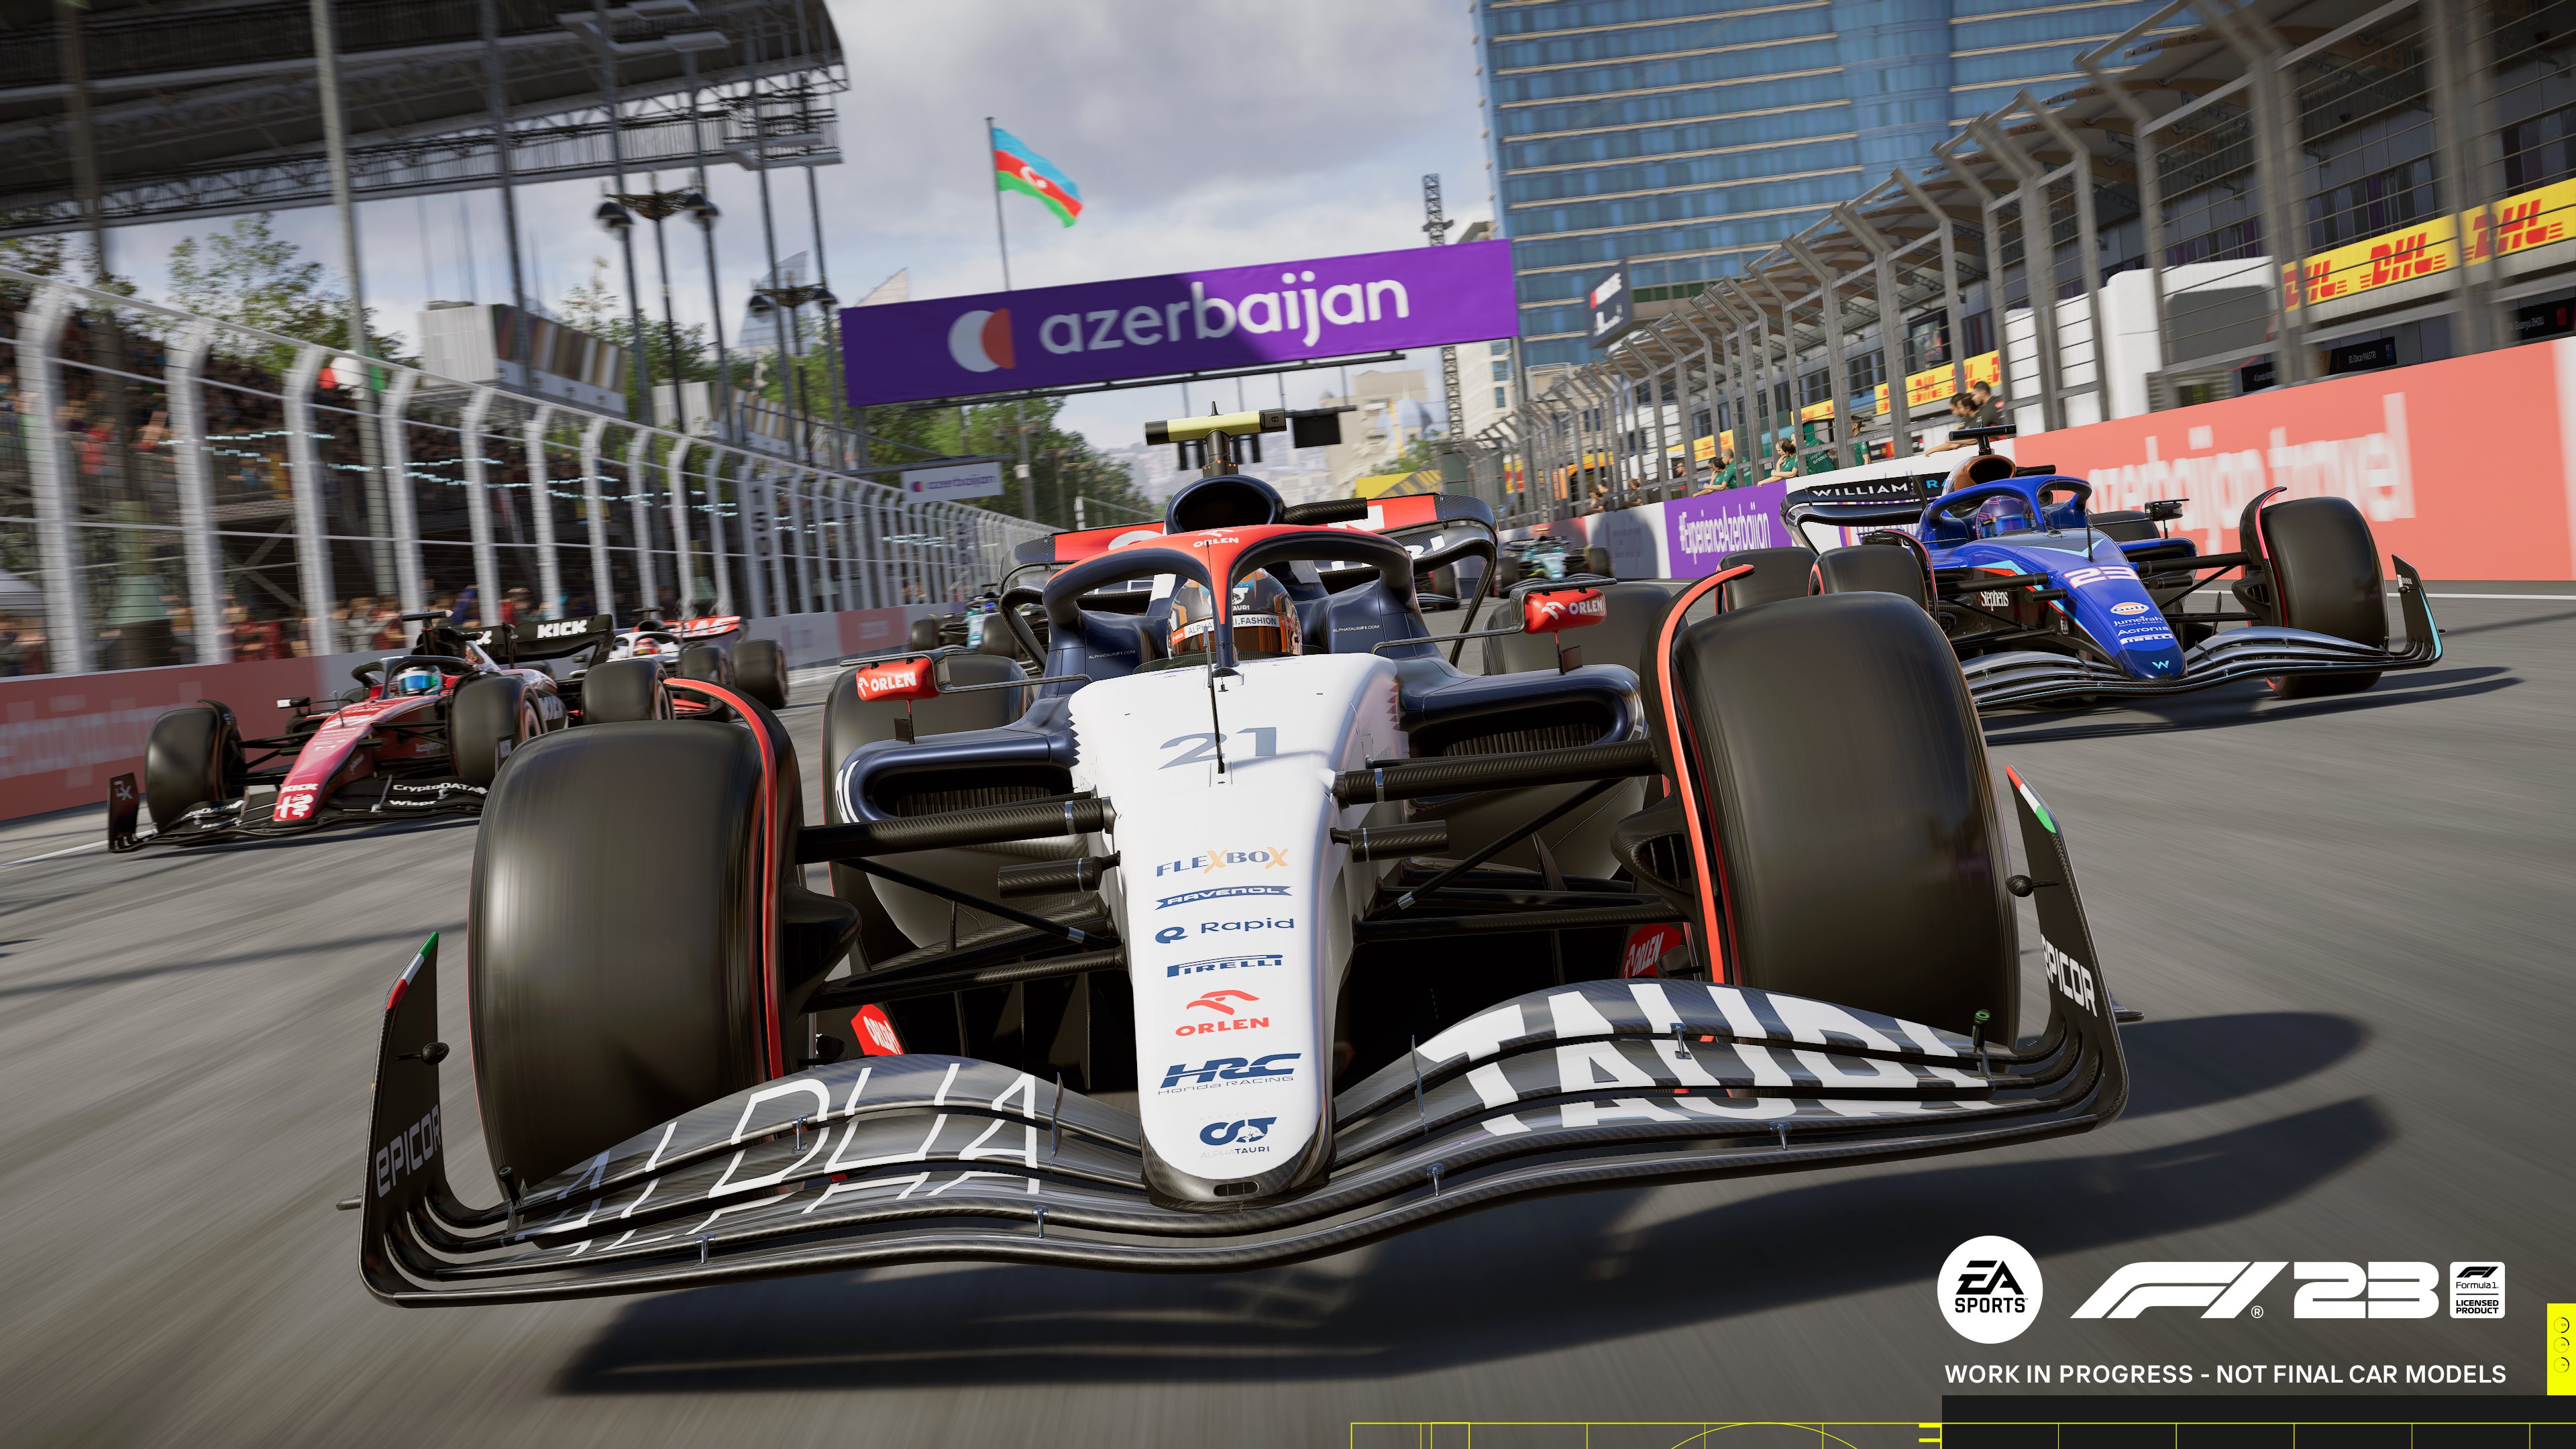 F1 23 Gameplay Videos - Bahrain, Silverstone, Hungary GP & Much More